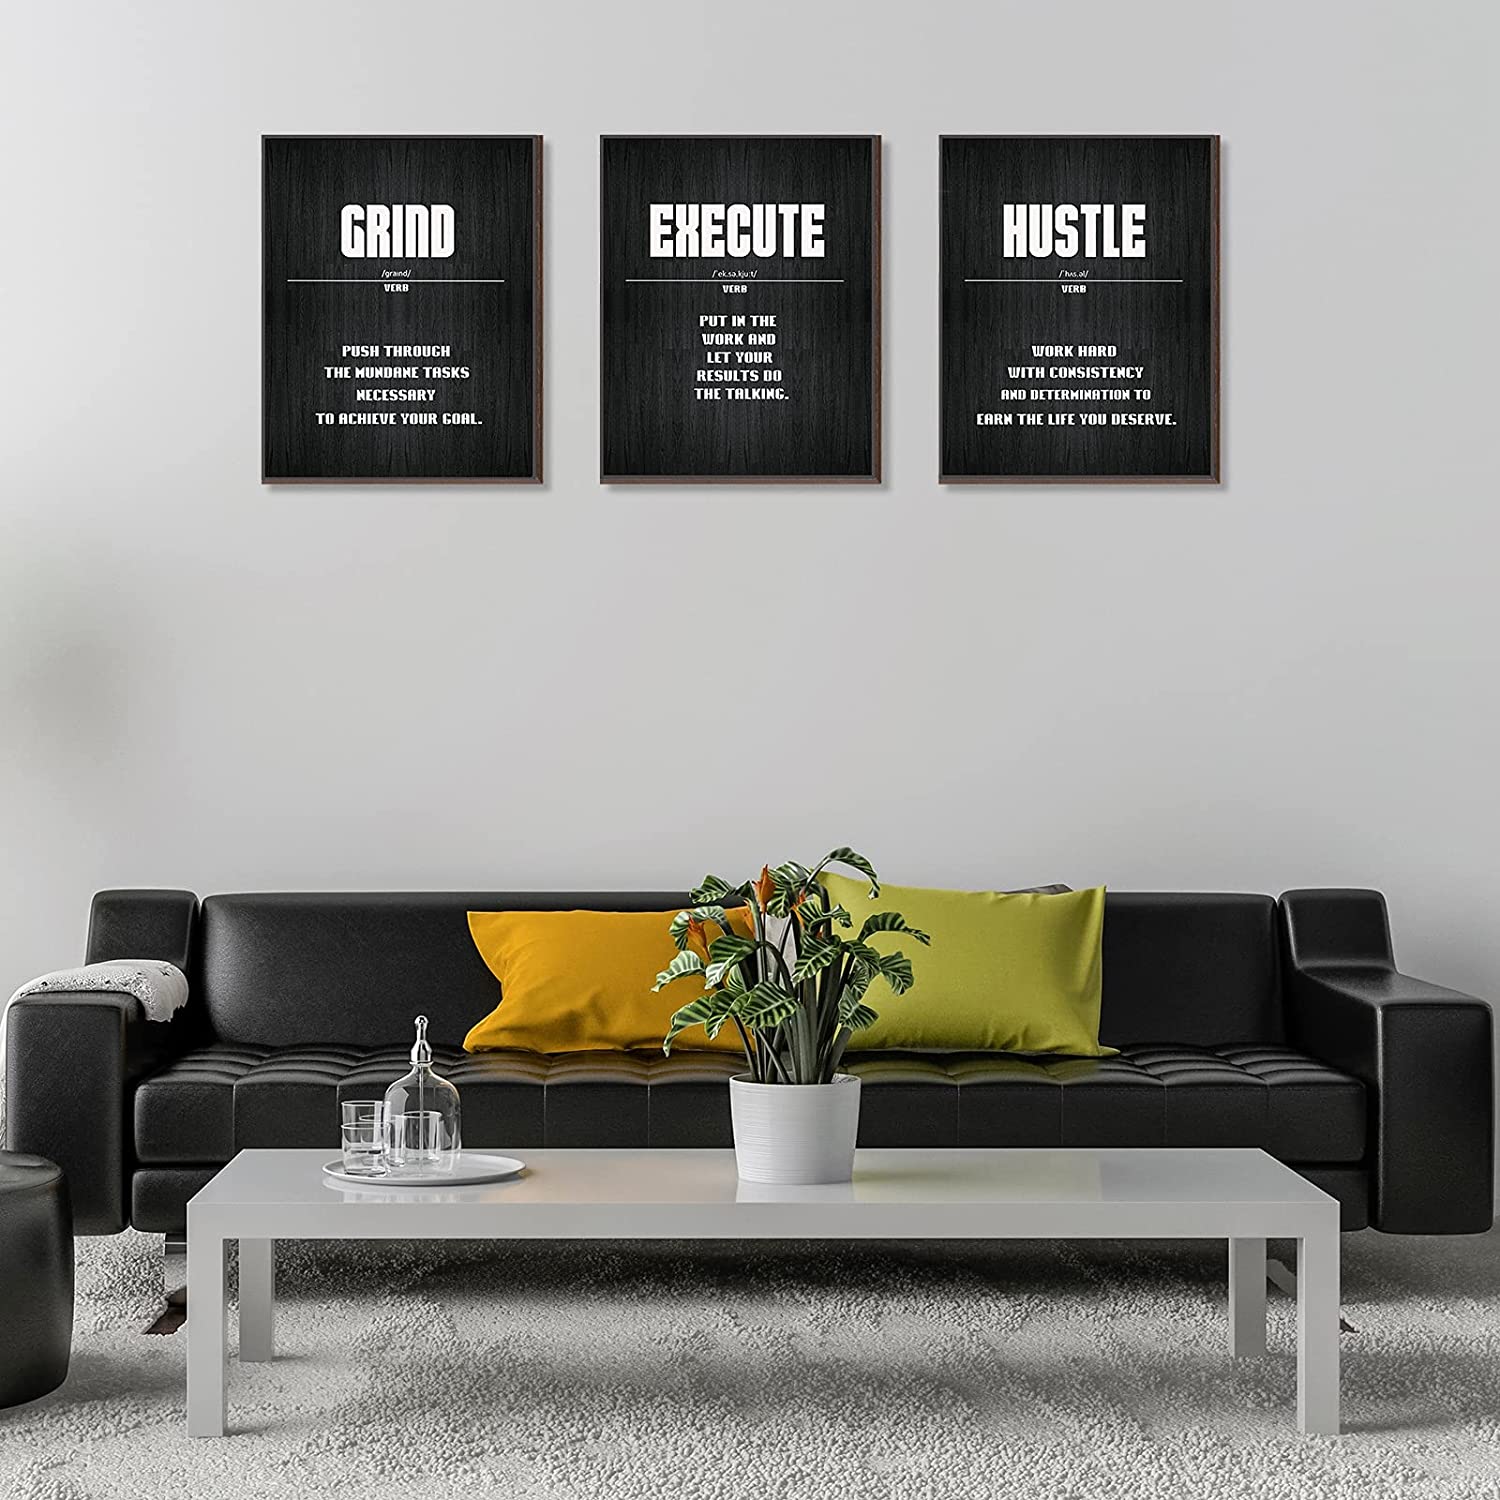 HTAIGUO Pieces Inspirational Motivational Wooden Hanging Wall Arts Grind  Hustle Execute Quotes Wall Decoration Signs for Office Living Room Gym Decor  Hanging Paintings